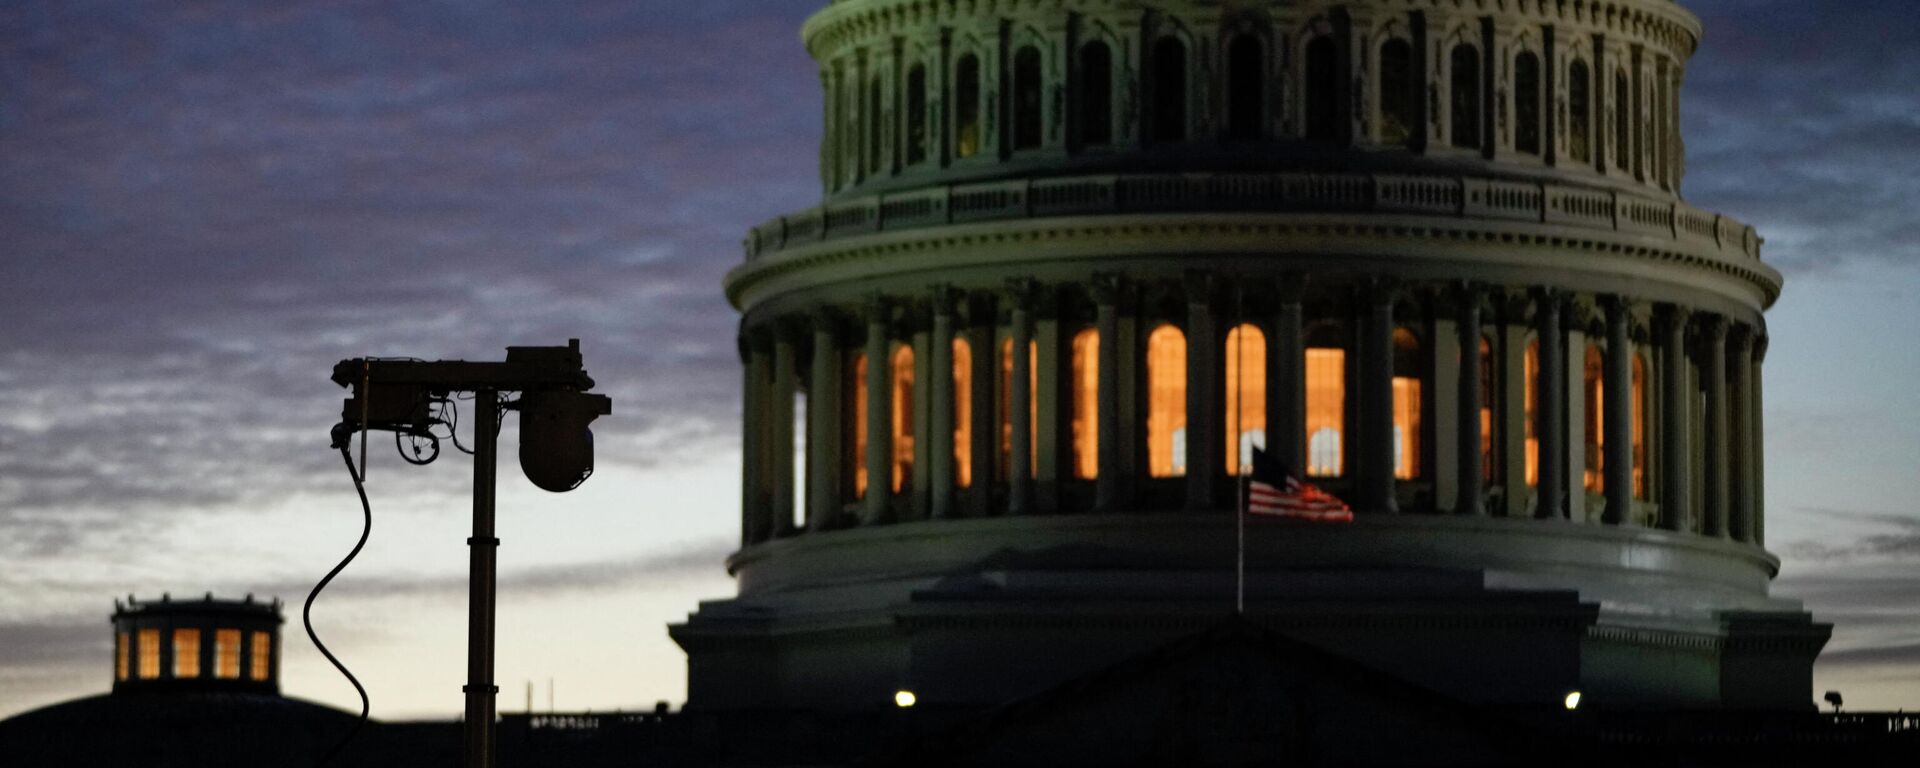 A surveillance camera stands near the East Front of the U.S. Capitol at sunset on January 5, 2022 in Washington, DC - Sputnik International, 1920, 06.01.2022